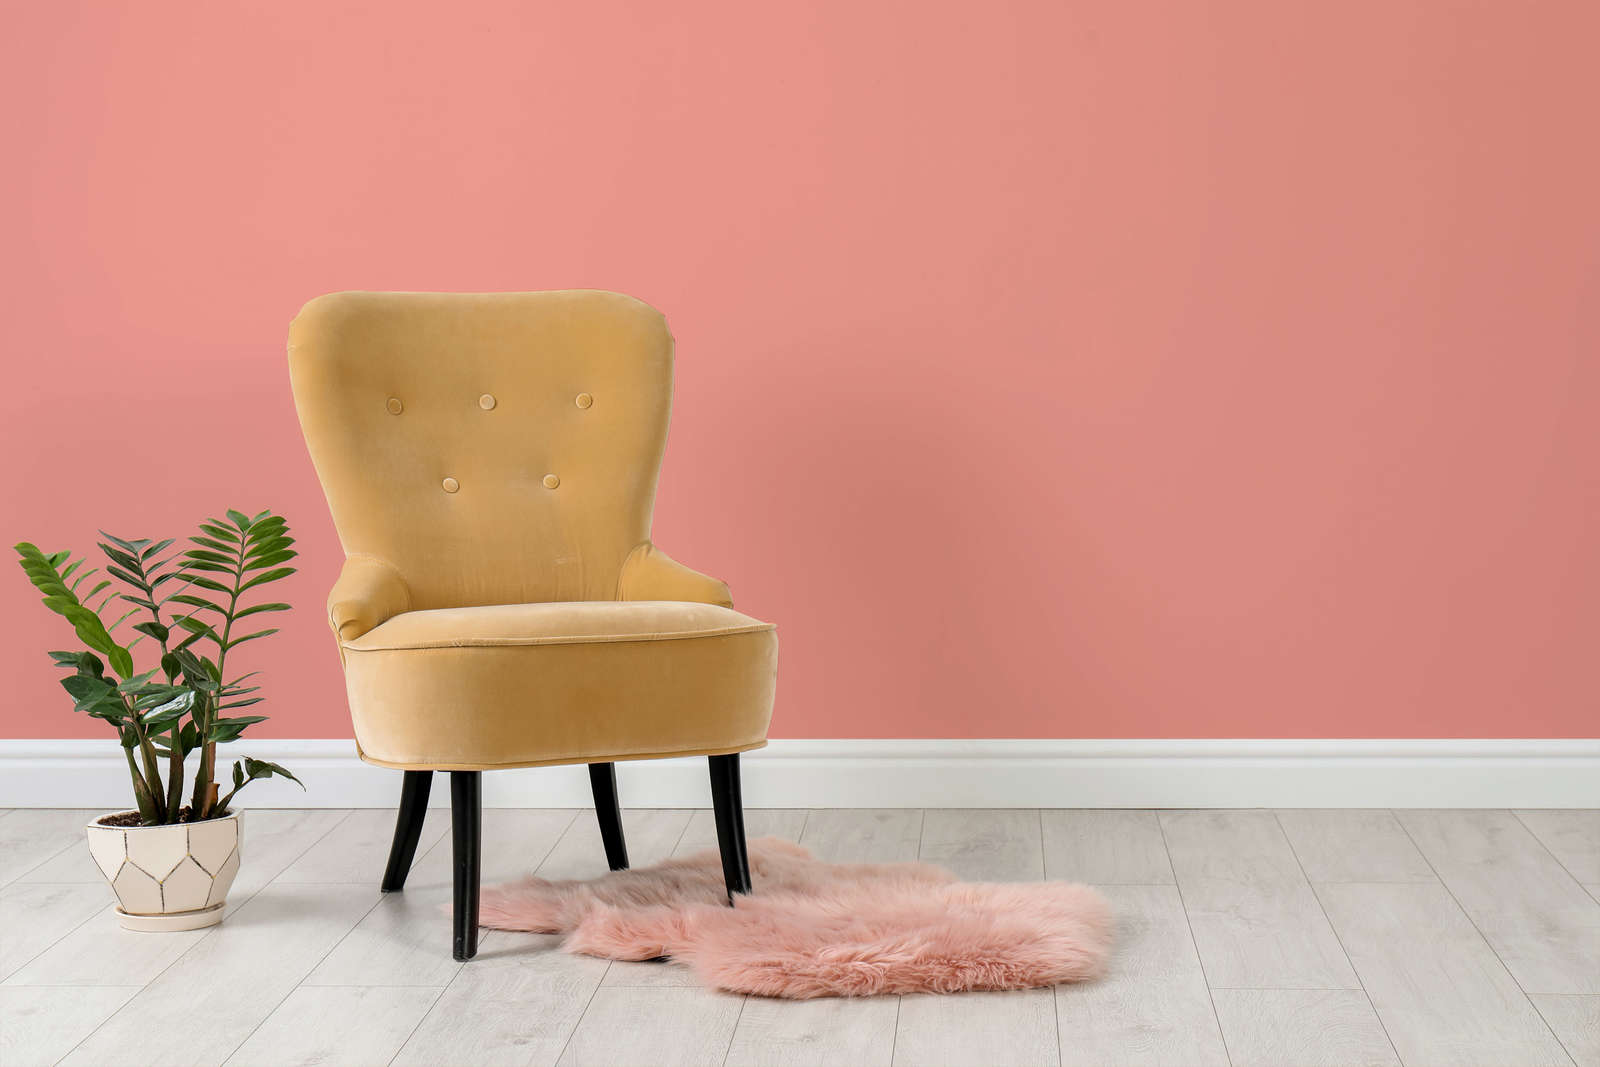             Wall Paint TCK7004 »Georgeous Grapefruit« in bright coral – 2.5 litre
        